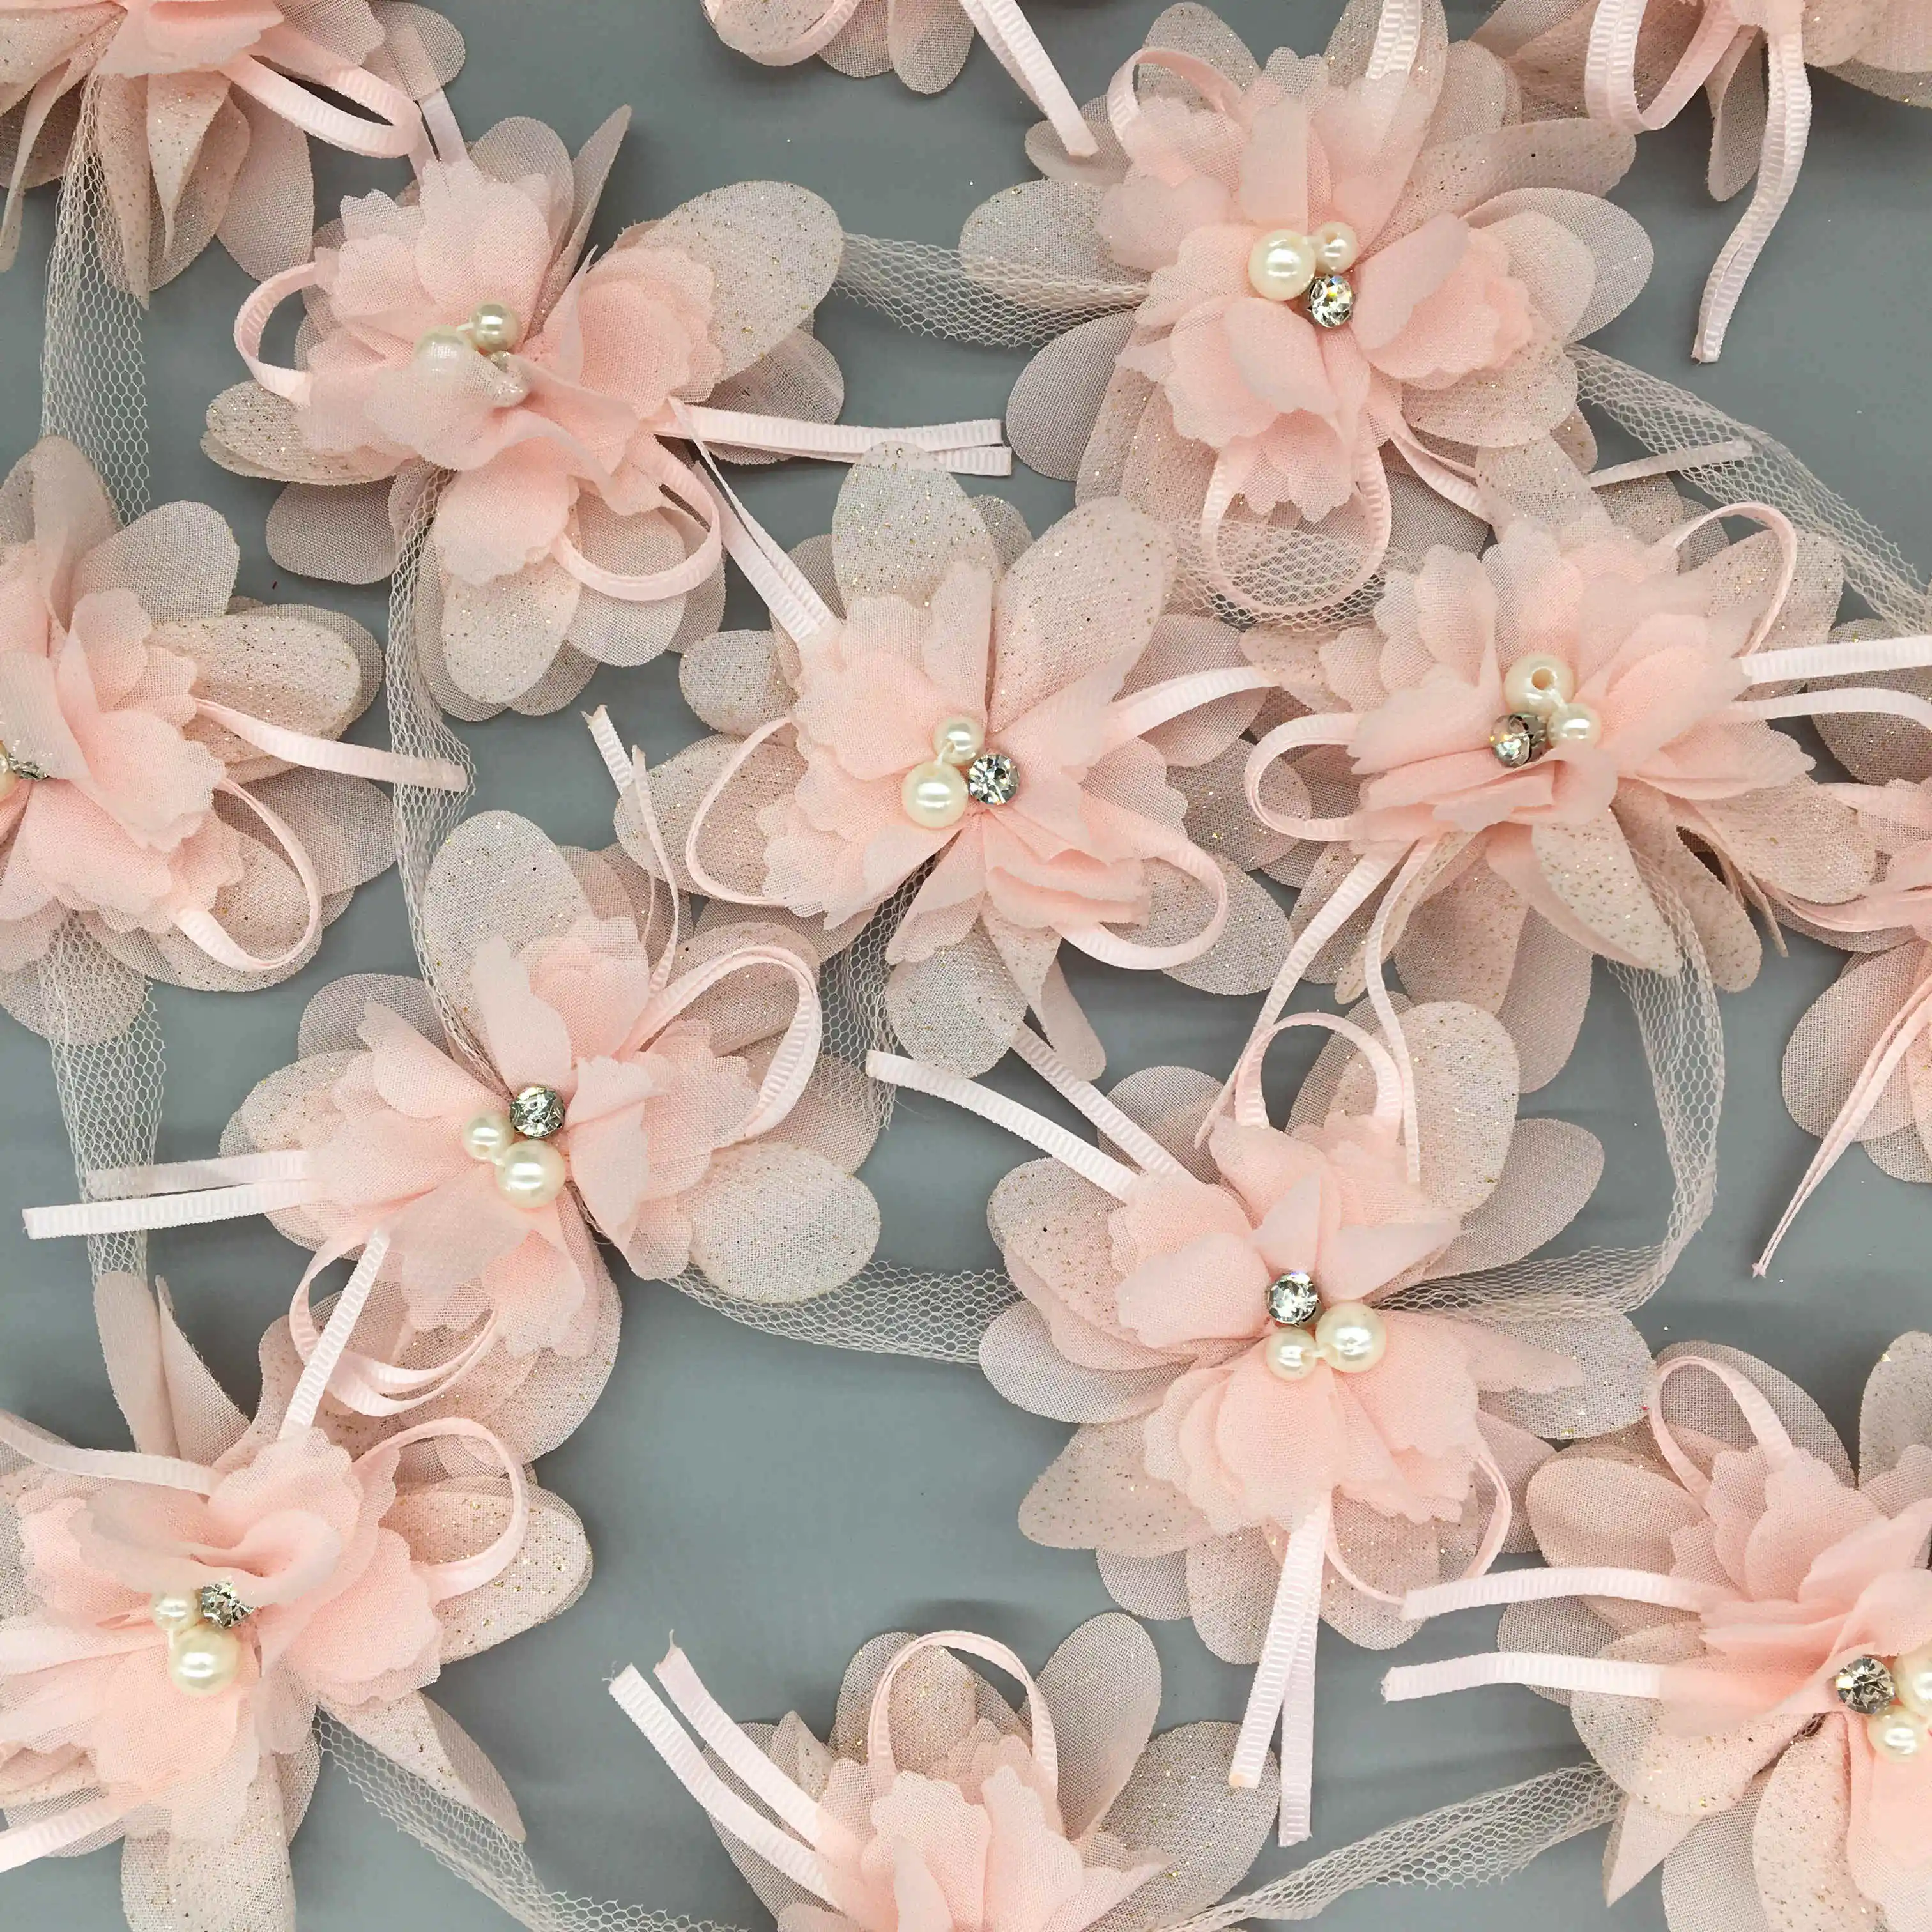 3D Flower Blush Pink Applique with Pearls